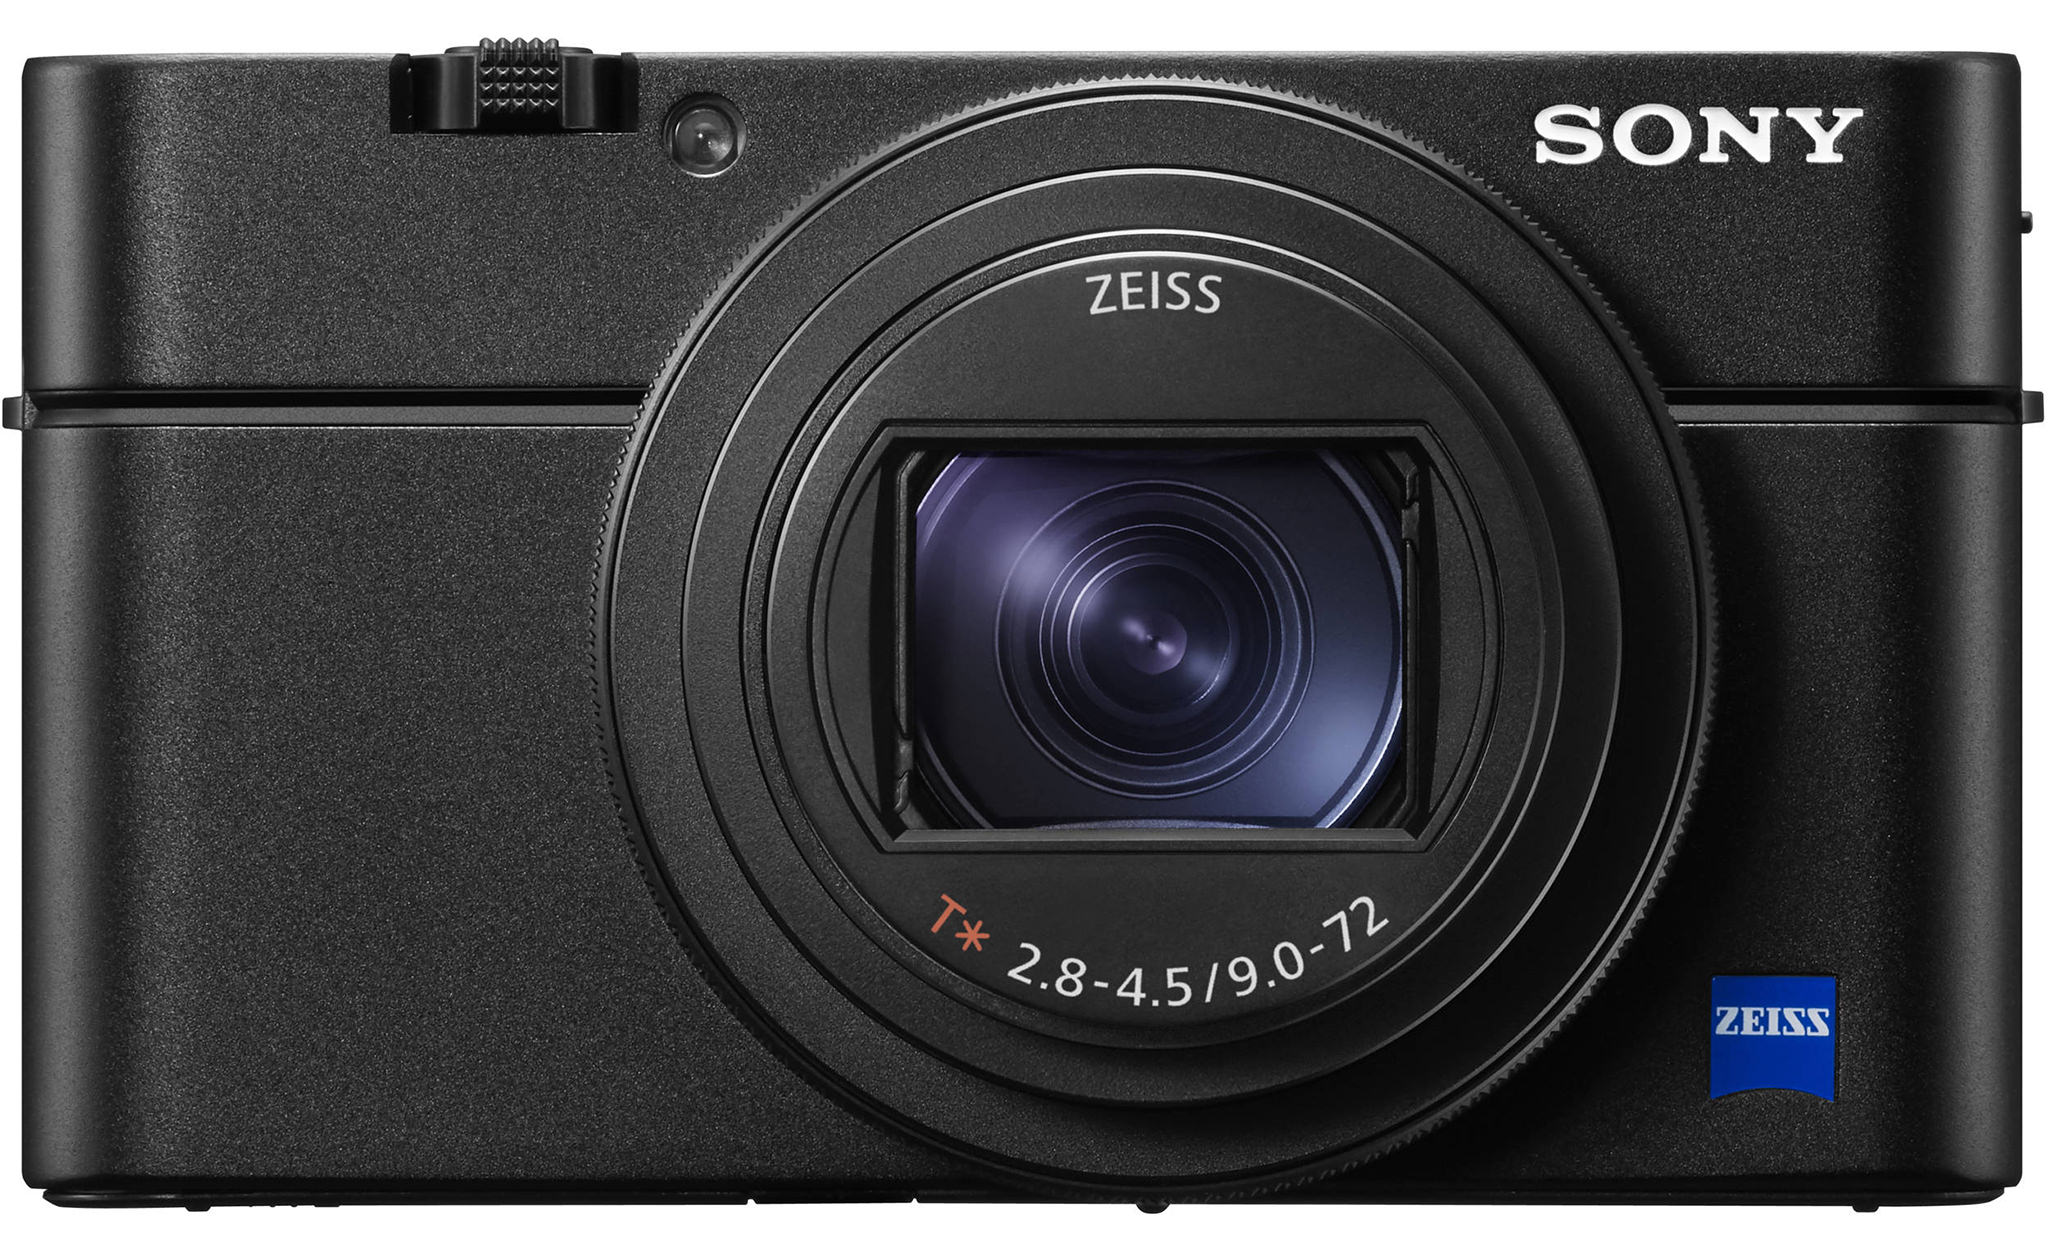  Sony RX100 20.2 MP Premium Compact Digital Camera w/ 1-inch  sensor, 28-100mm ZEISS zoom lens, 3” LCD : Point And Shoot Digital Cameras  : Electronics